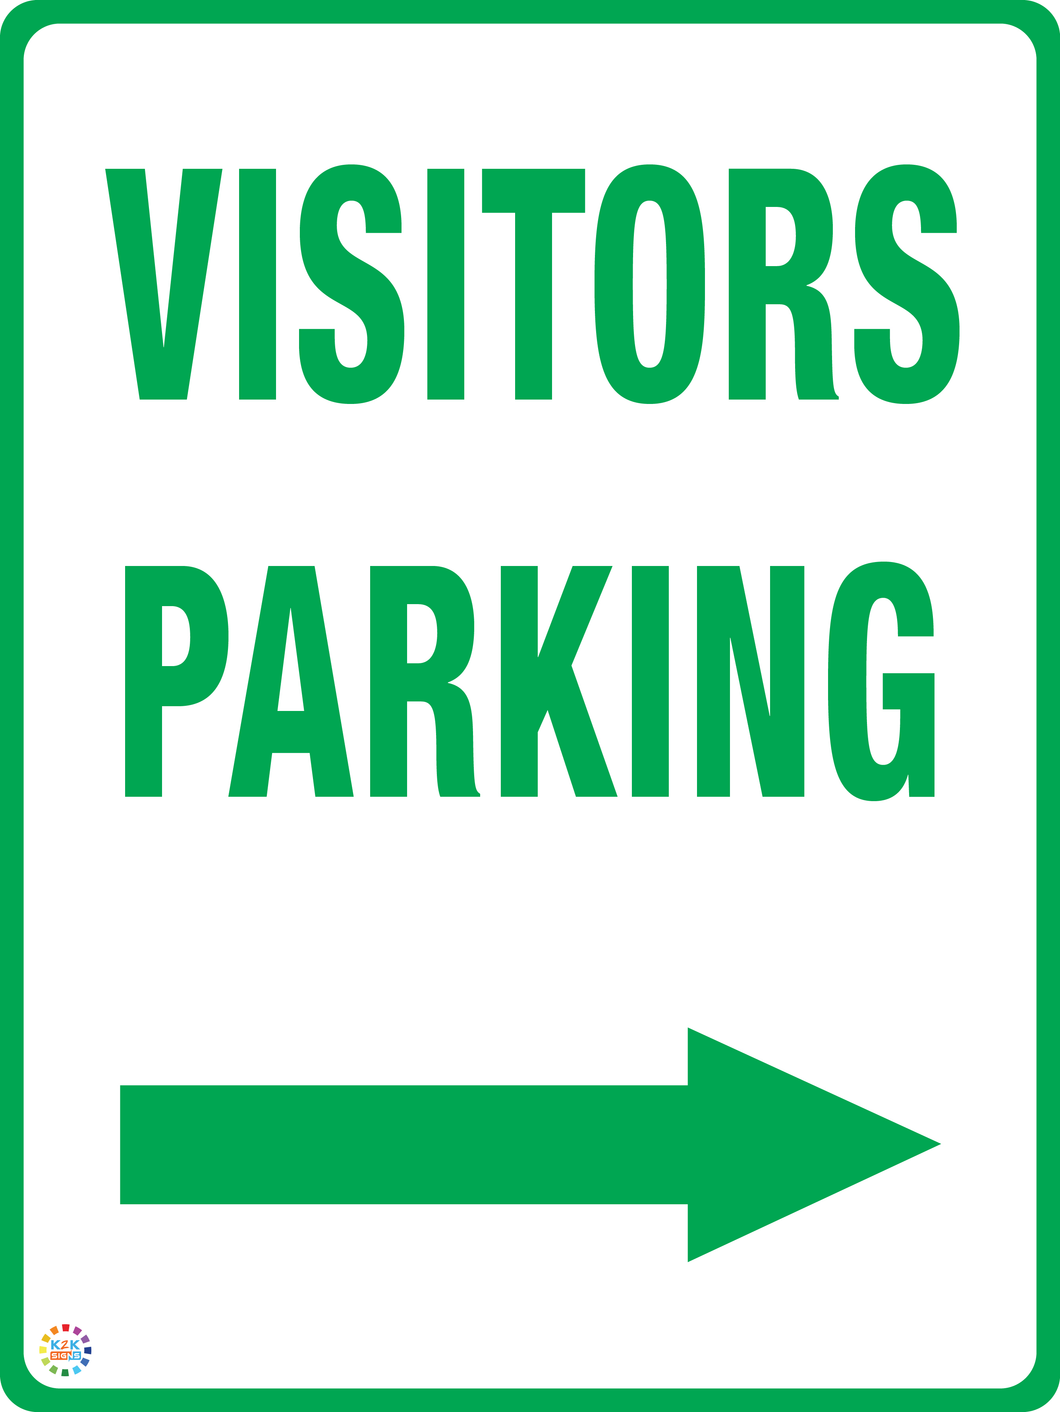 Visitors Parking (Right Arrow) Sign